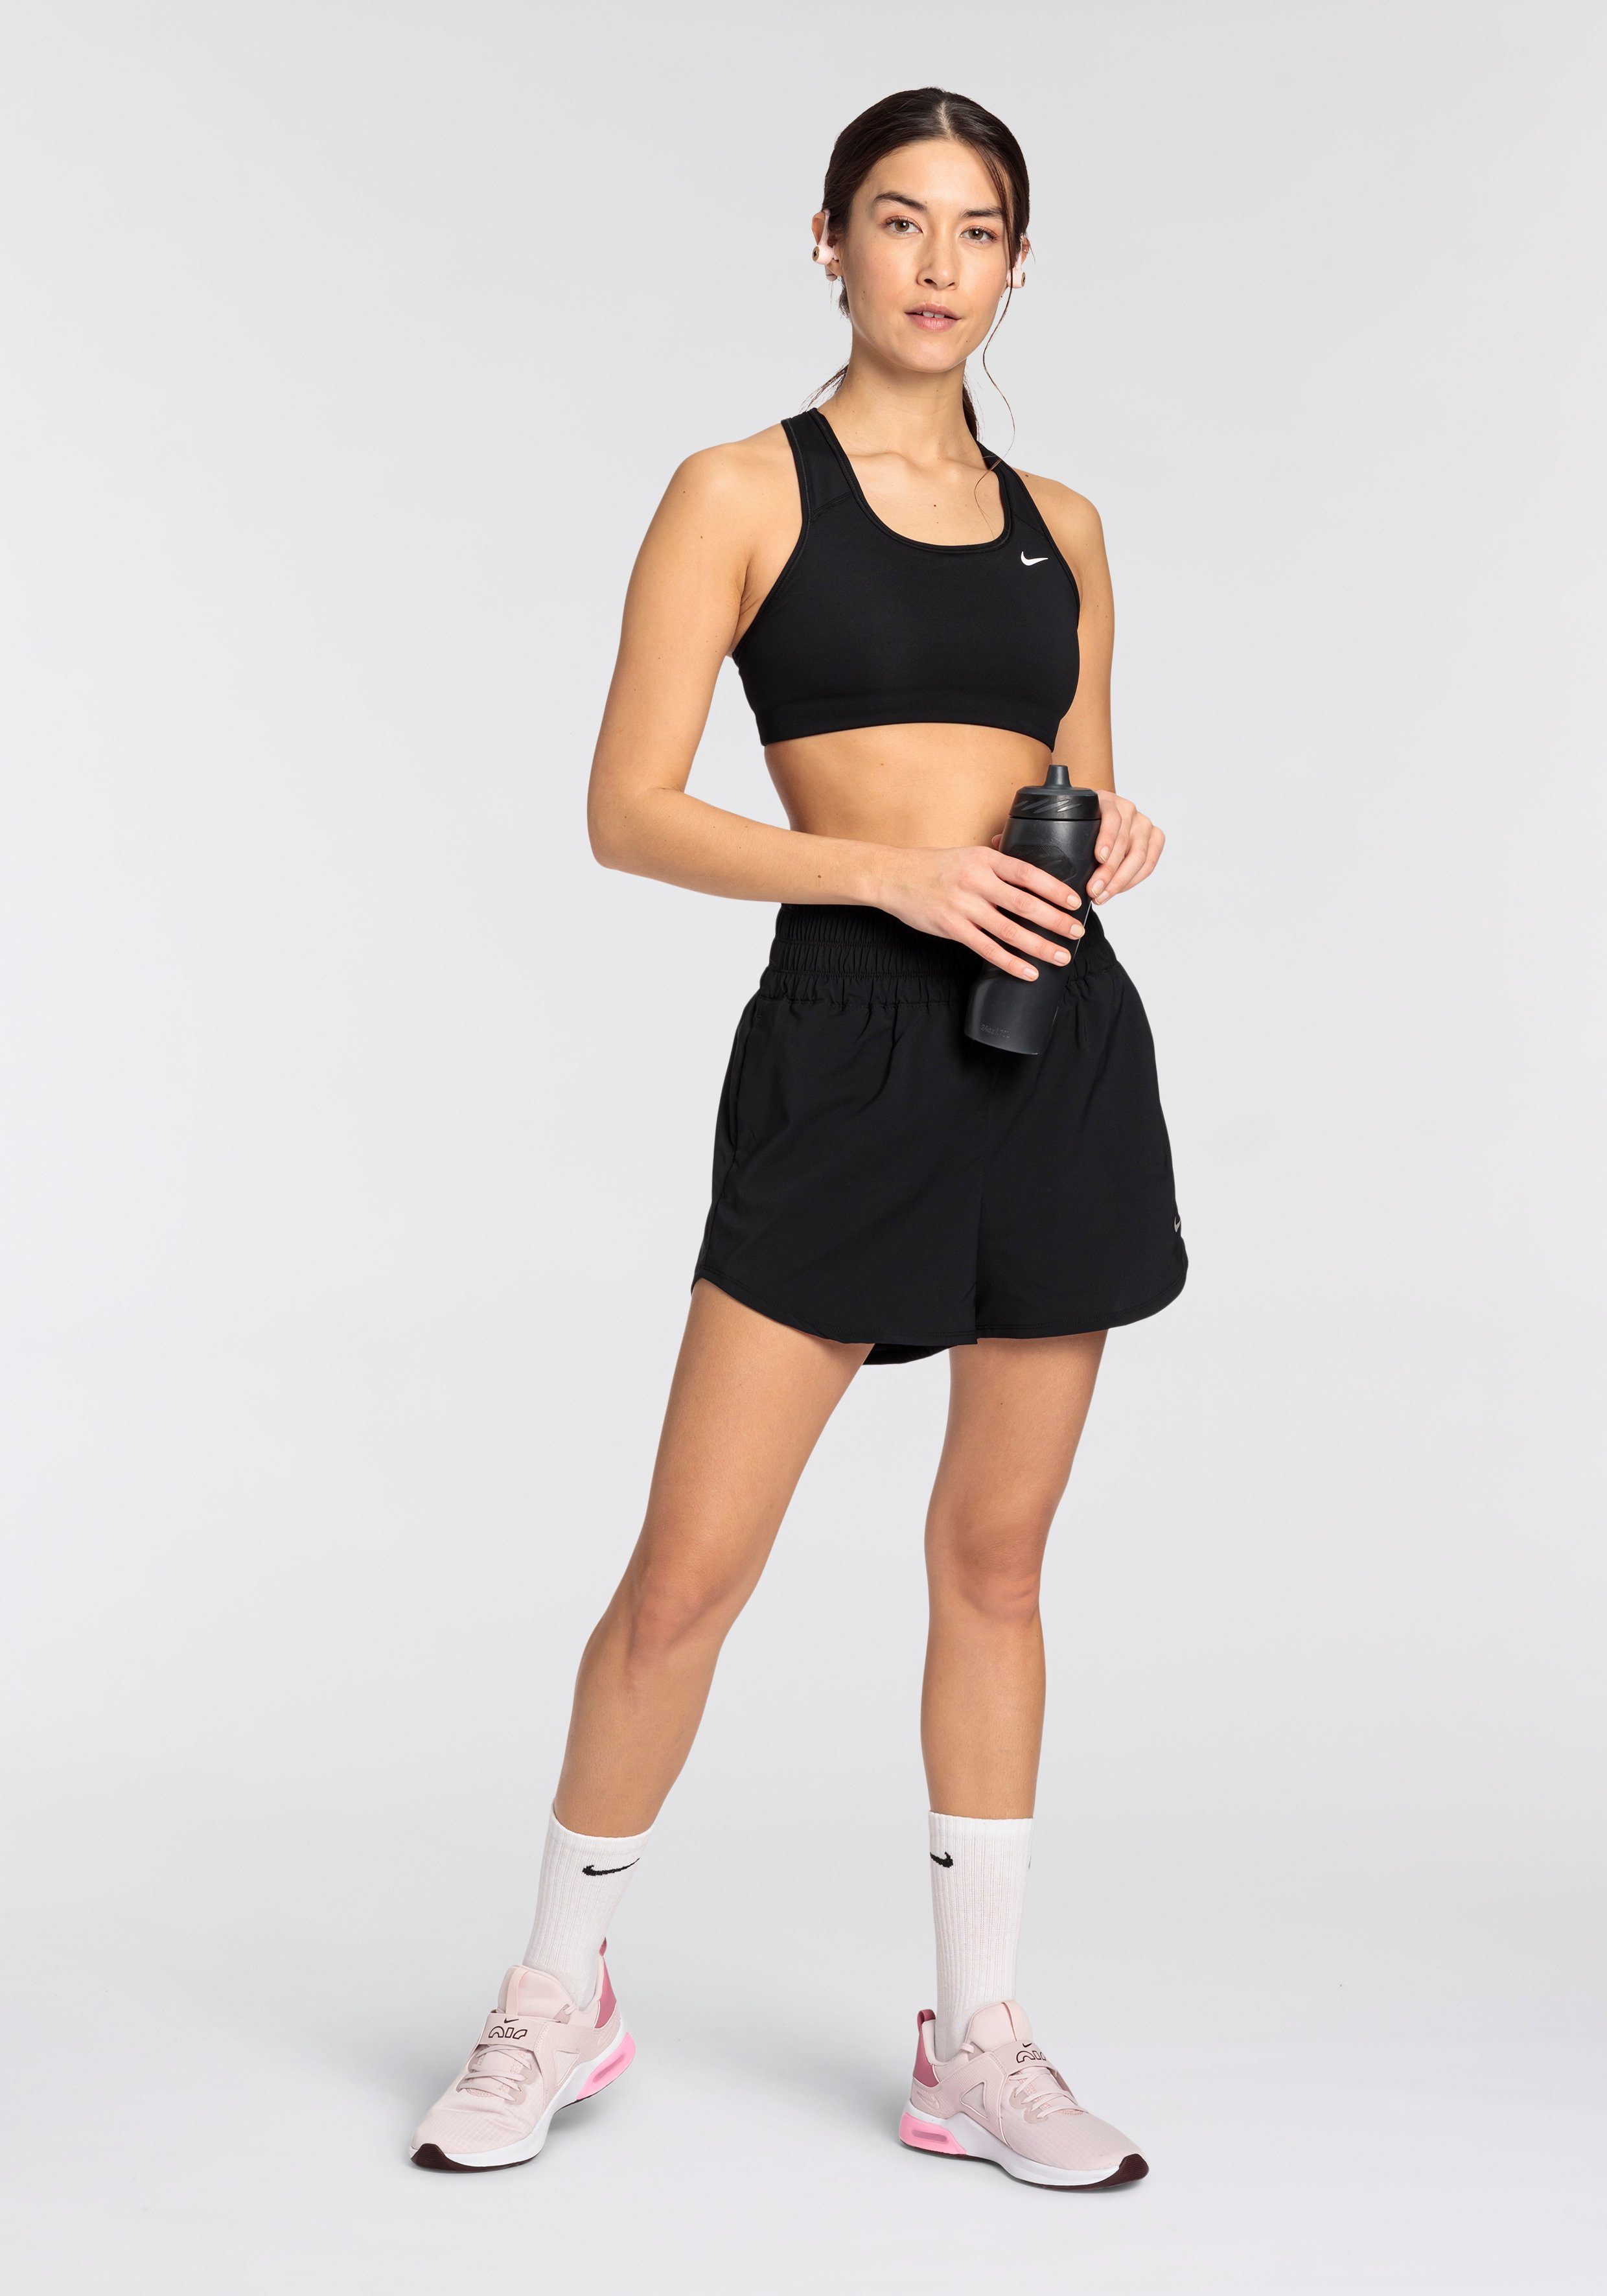 HIGH-WAISTED DRI-FIT ONE WOMEN'S SHORTS BRIEF-LINED ULTRA Trainingsshorts Nike